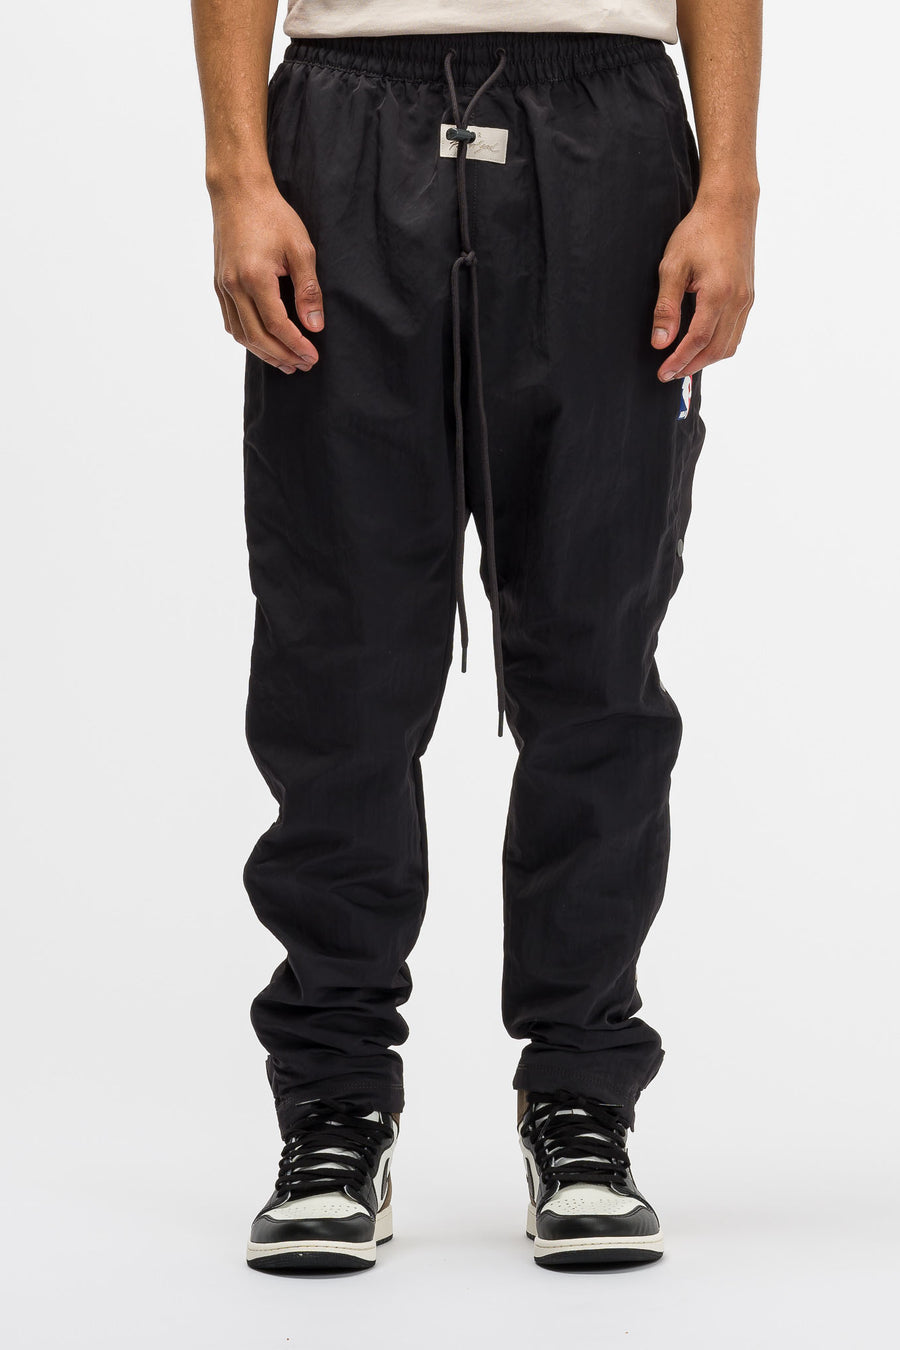 Fear of God Warm-Up Pants in Black